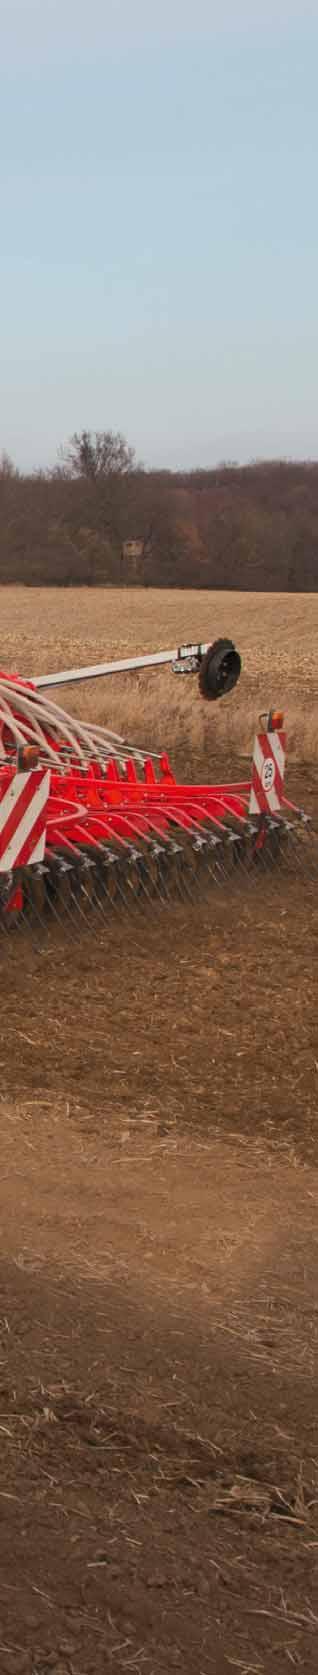 The TERRASEM recipe for success trailed mulch seed drills excellent productivity between 9.84 and 29.